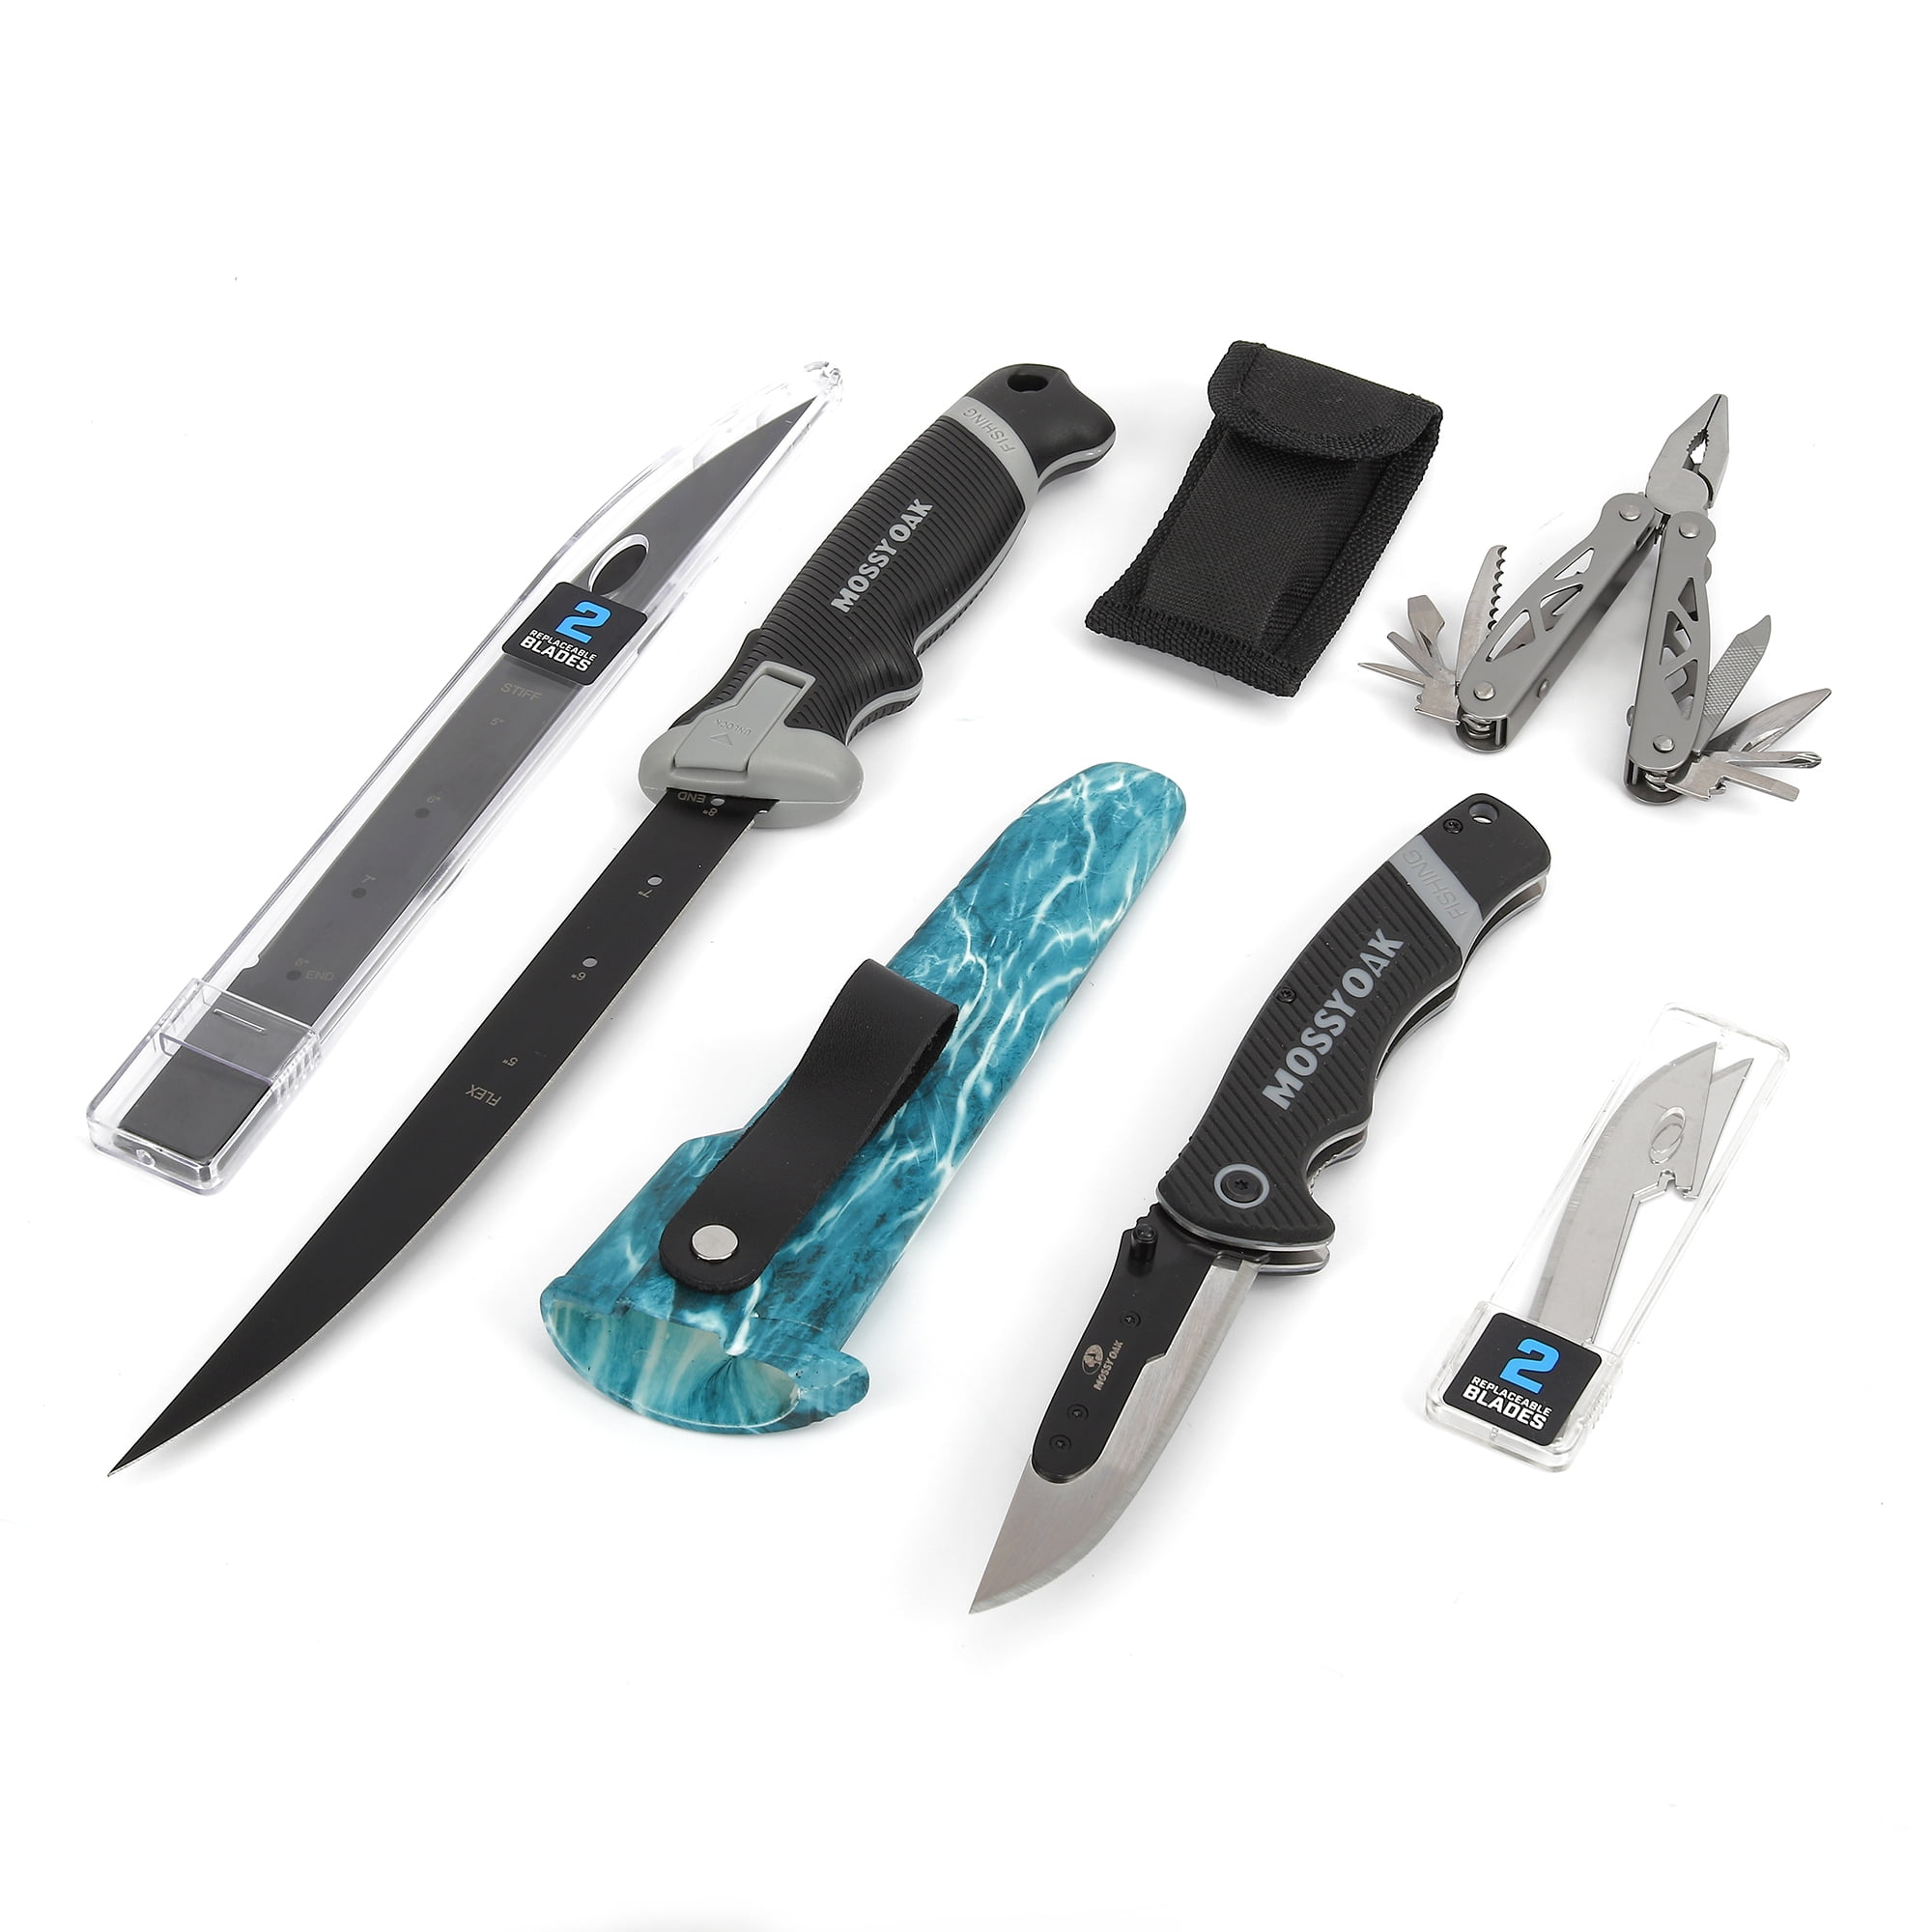 Mossy Oak 8-piece Anglers Combo with Multitool – Walmart Inventory